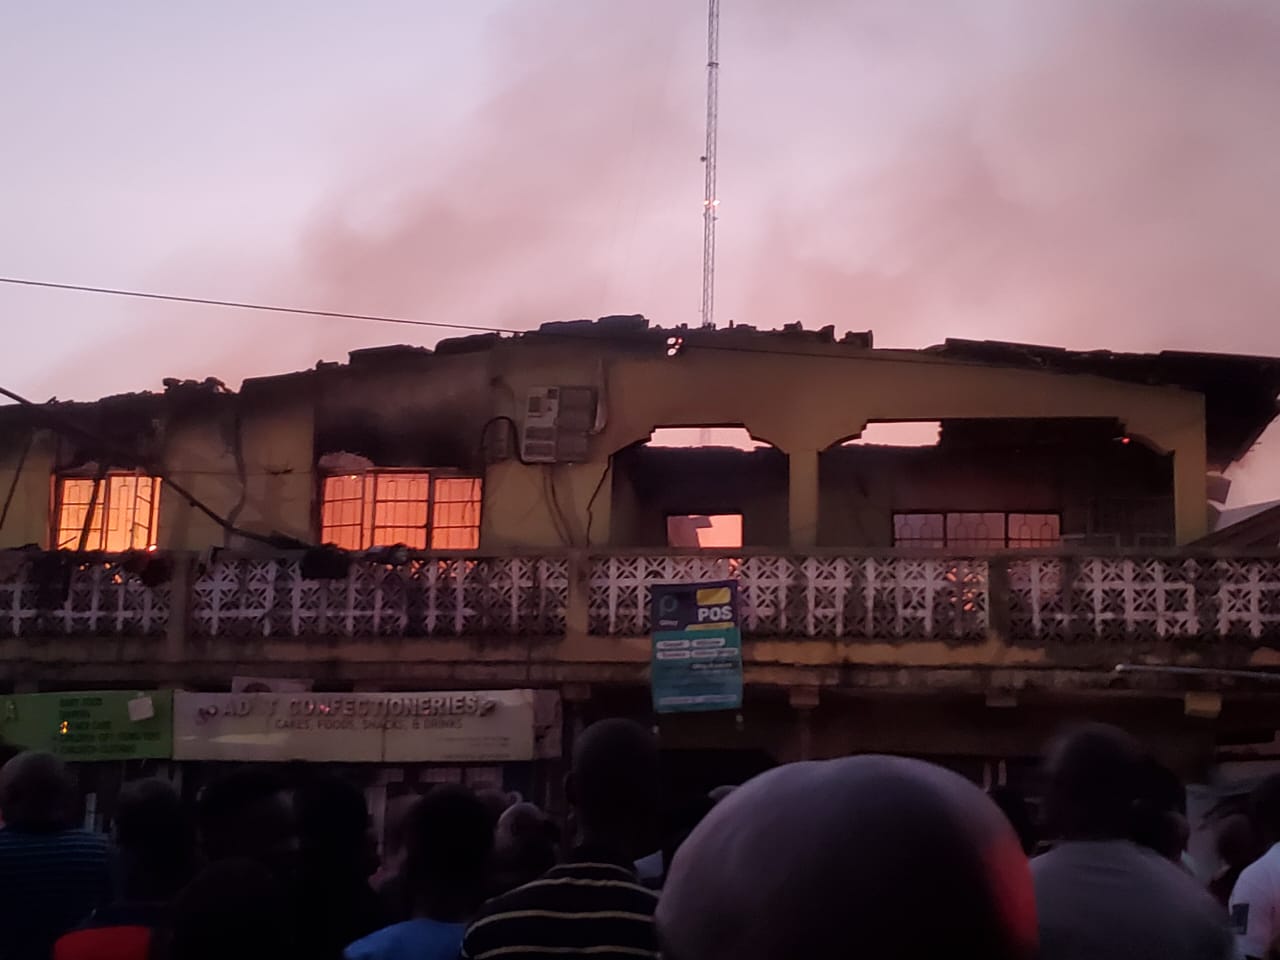 Lagos Residential Structure Destroyed By Fire, Yours Truly, News, March 20, 2023